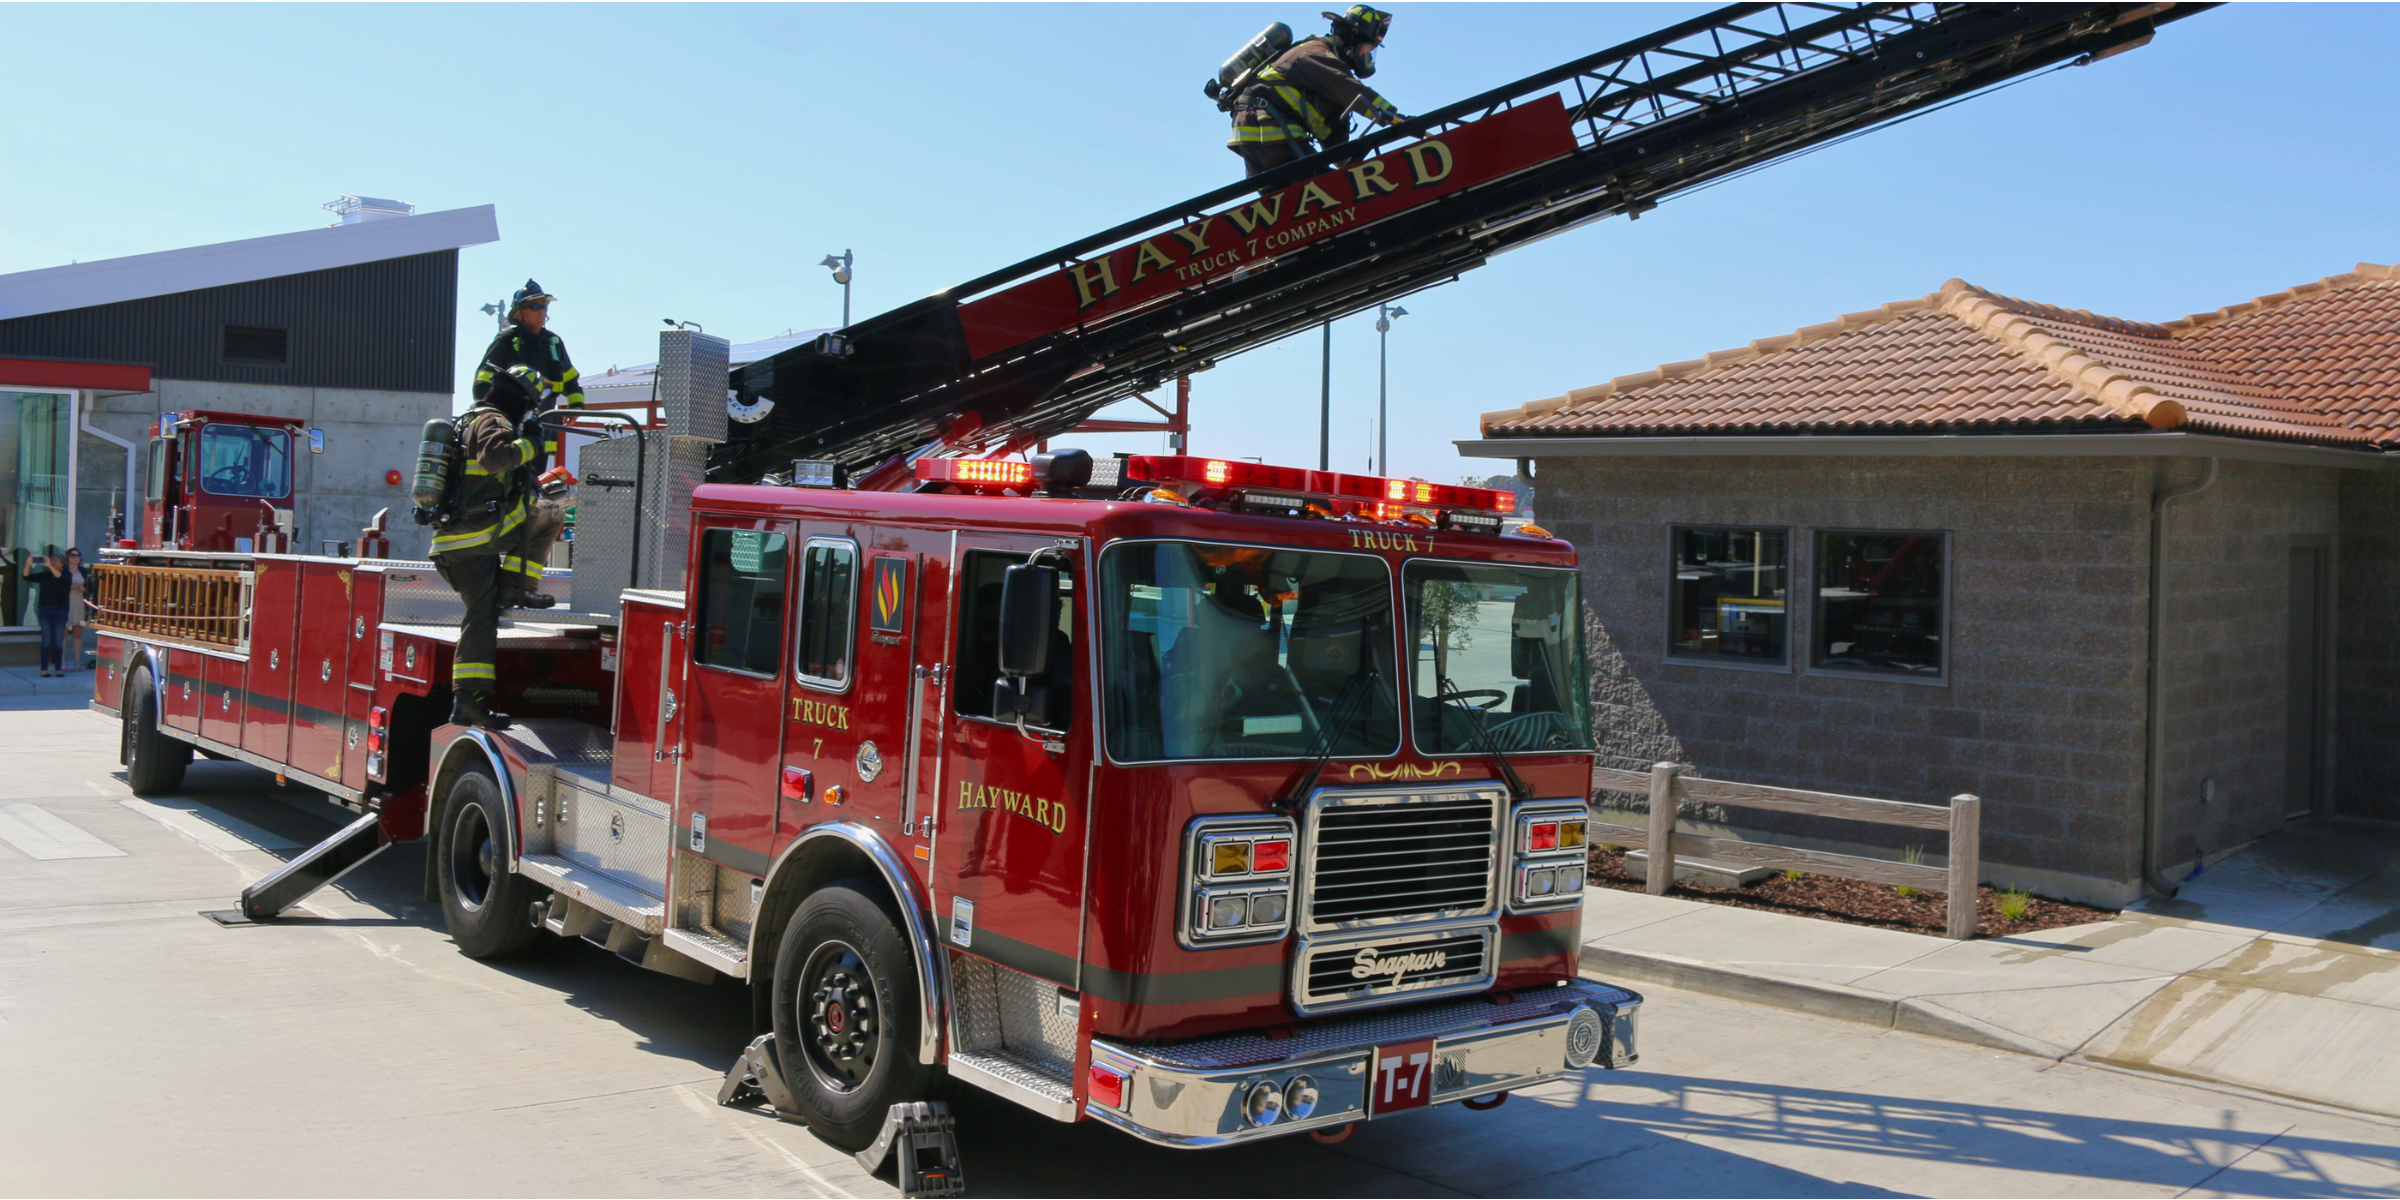 A Fire Ladder Truck with the ladder raised